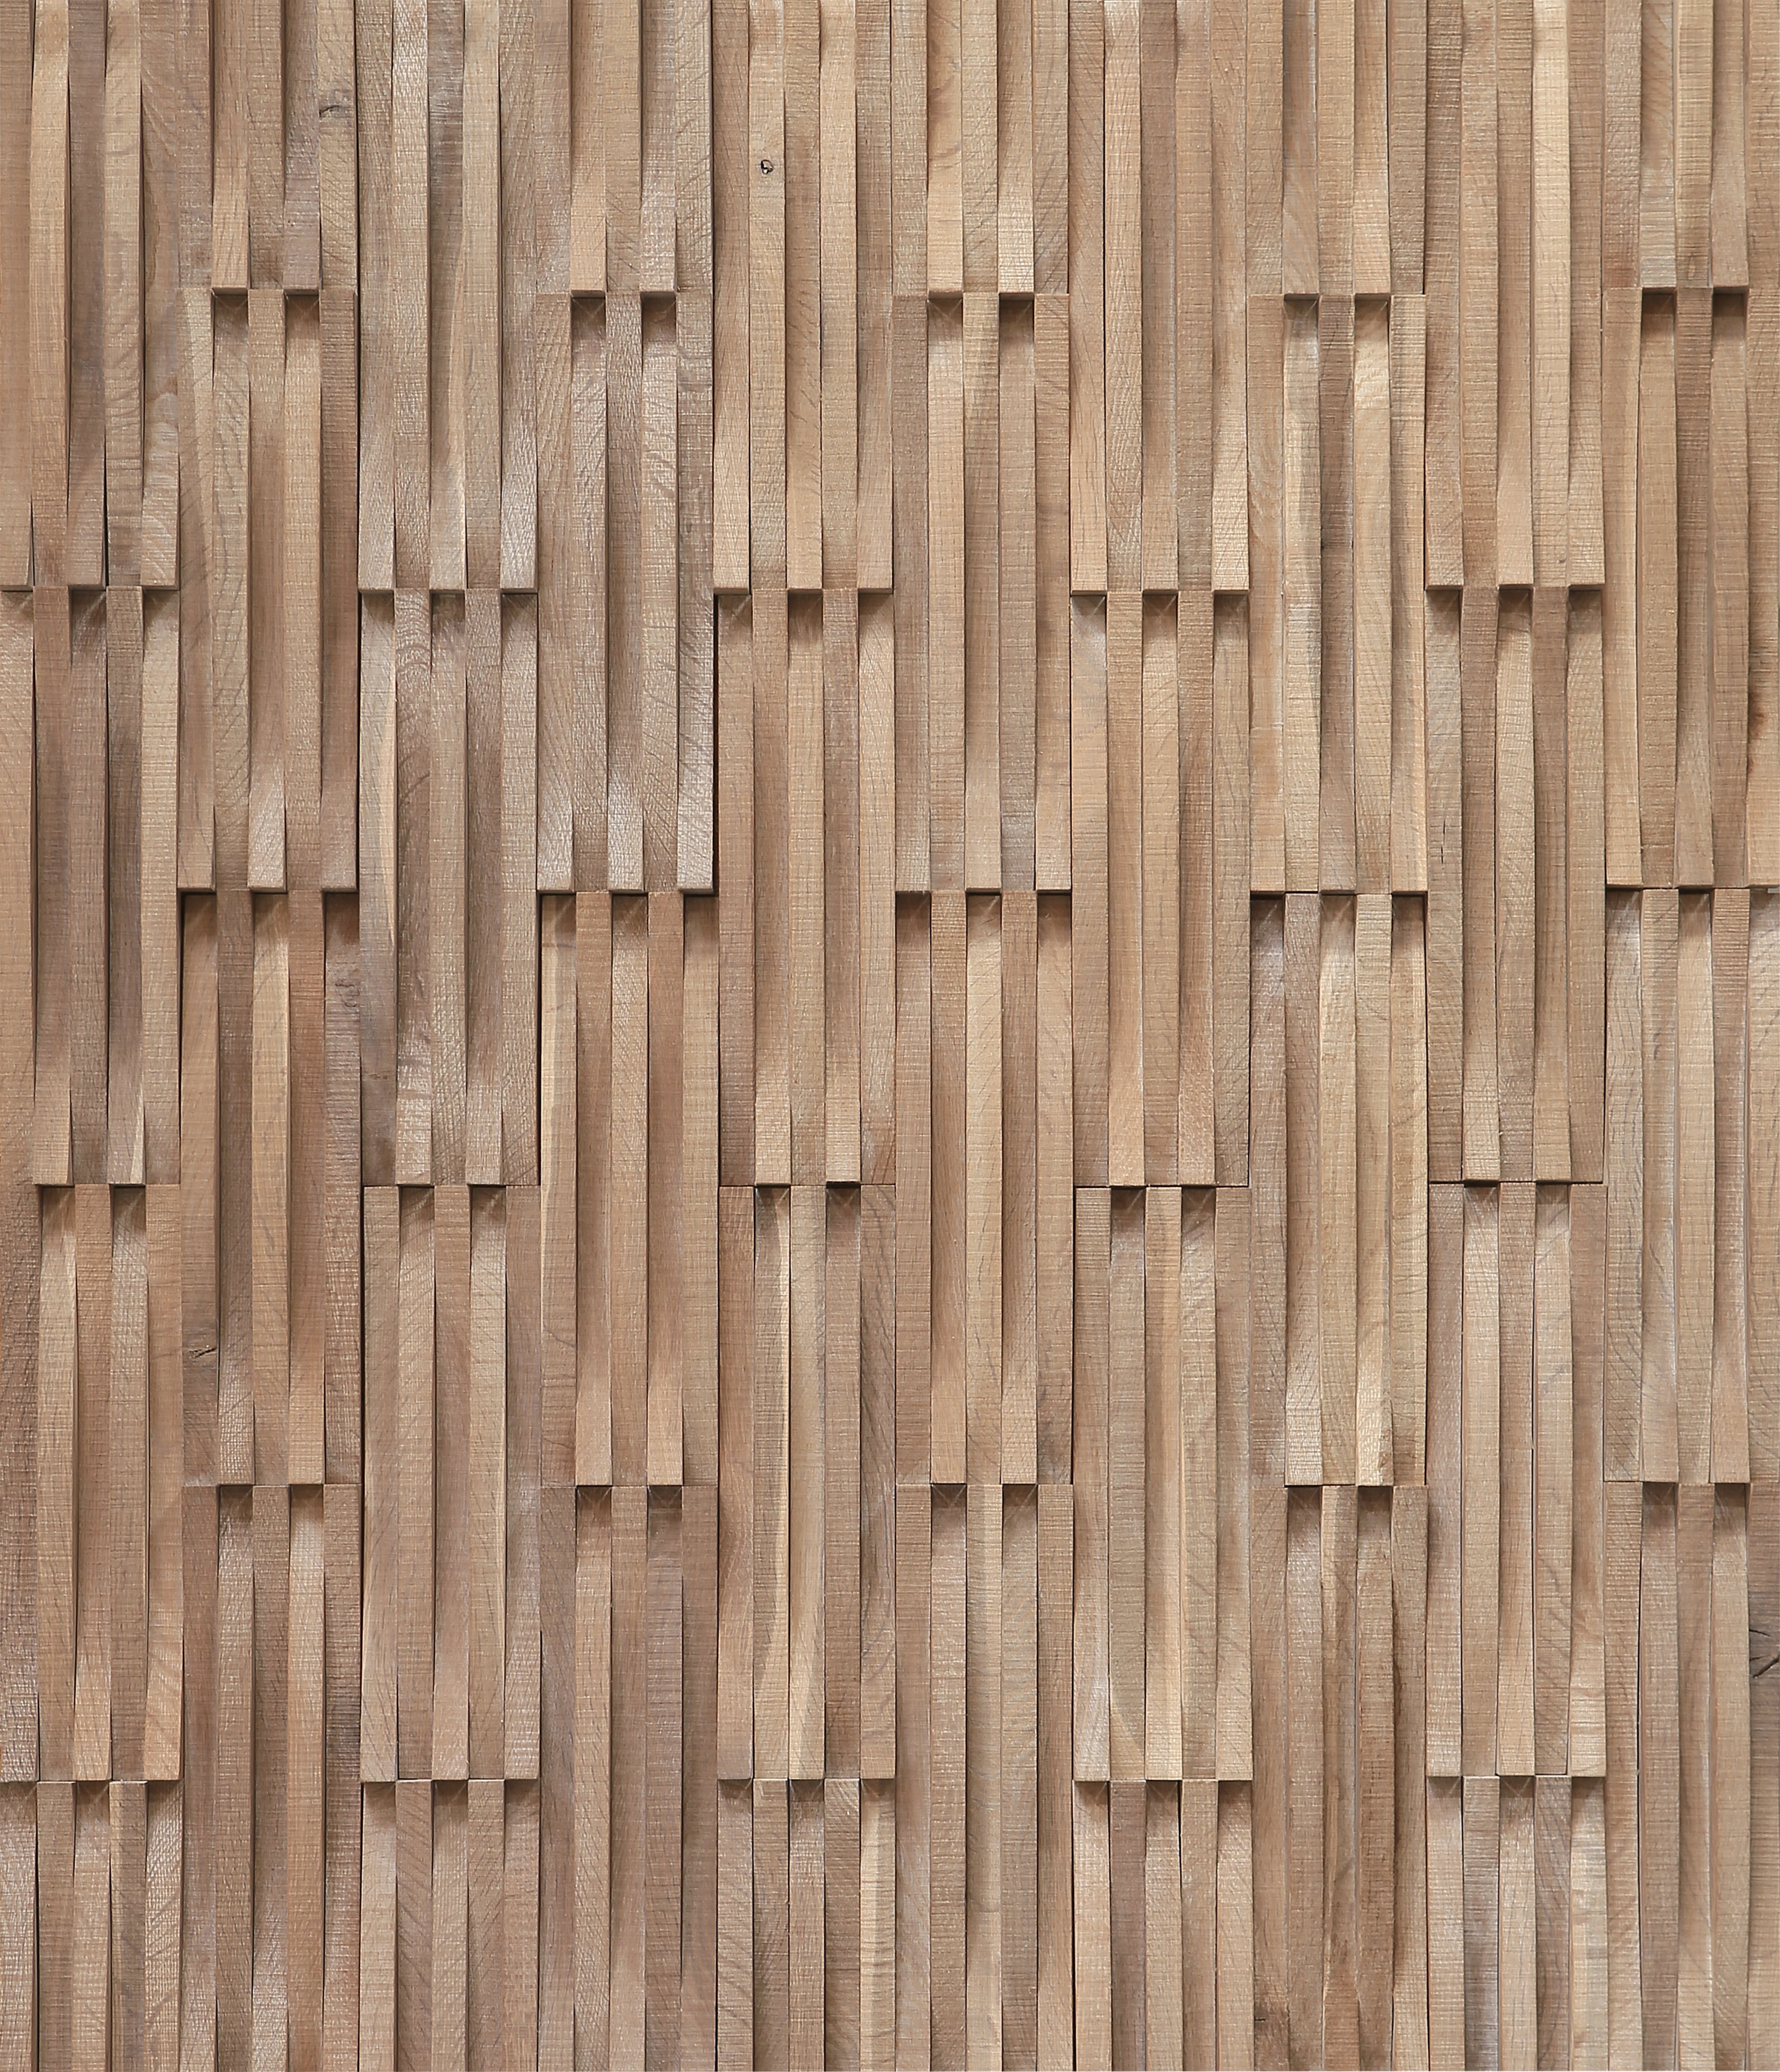 duchateau inceptiv curva lugano oak three dimensional wall natural wood panel matte lacquer for interior use distributed by surface group international